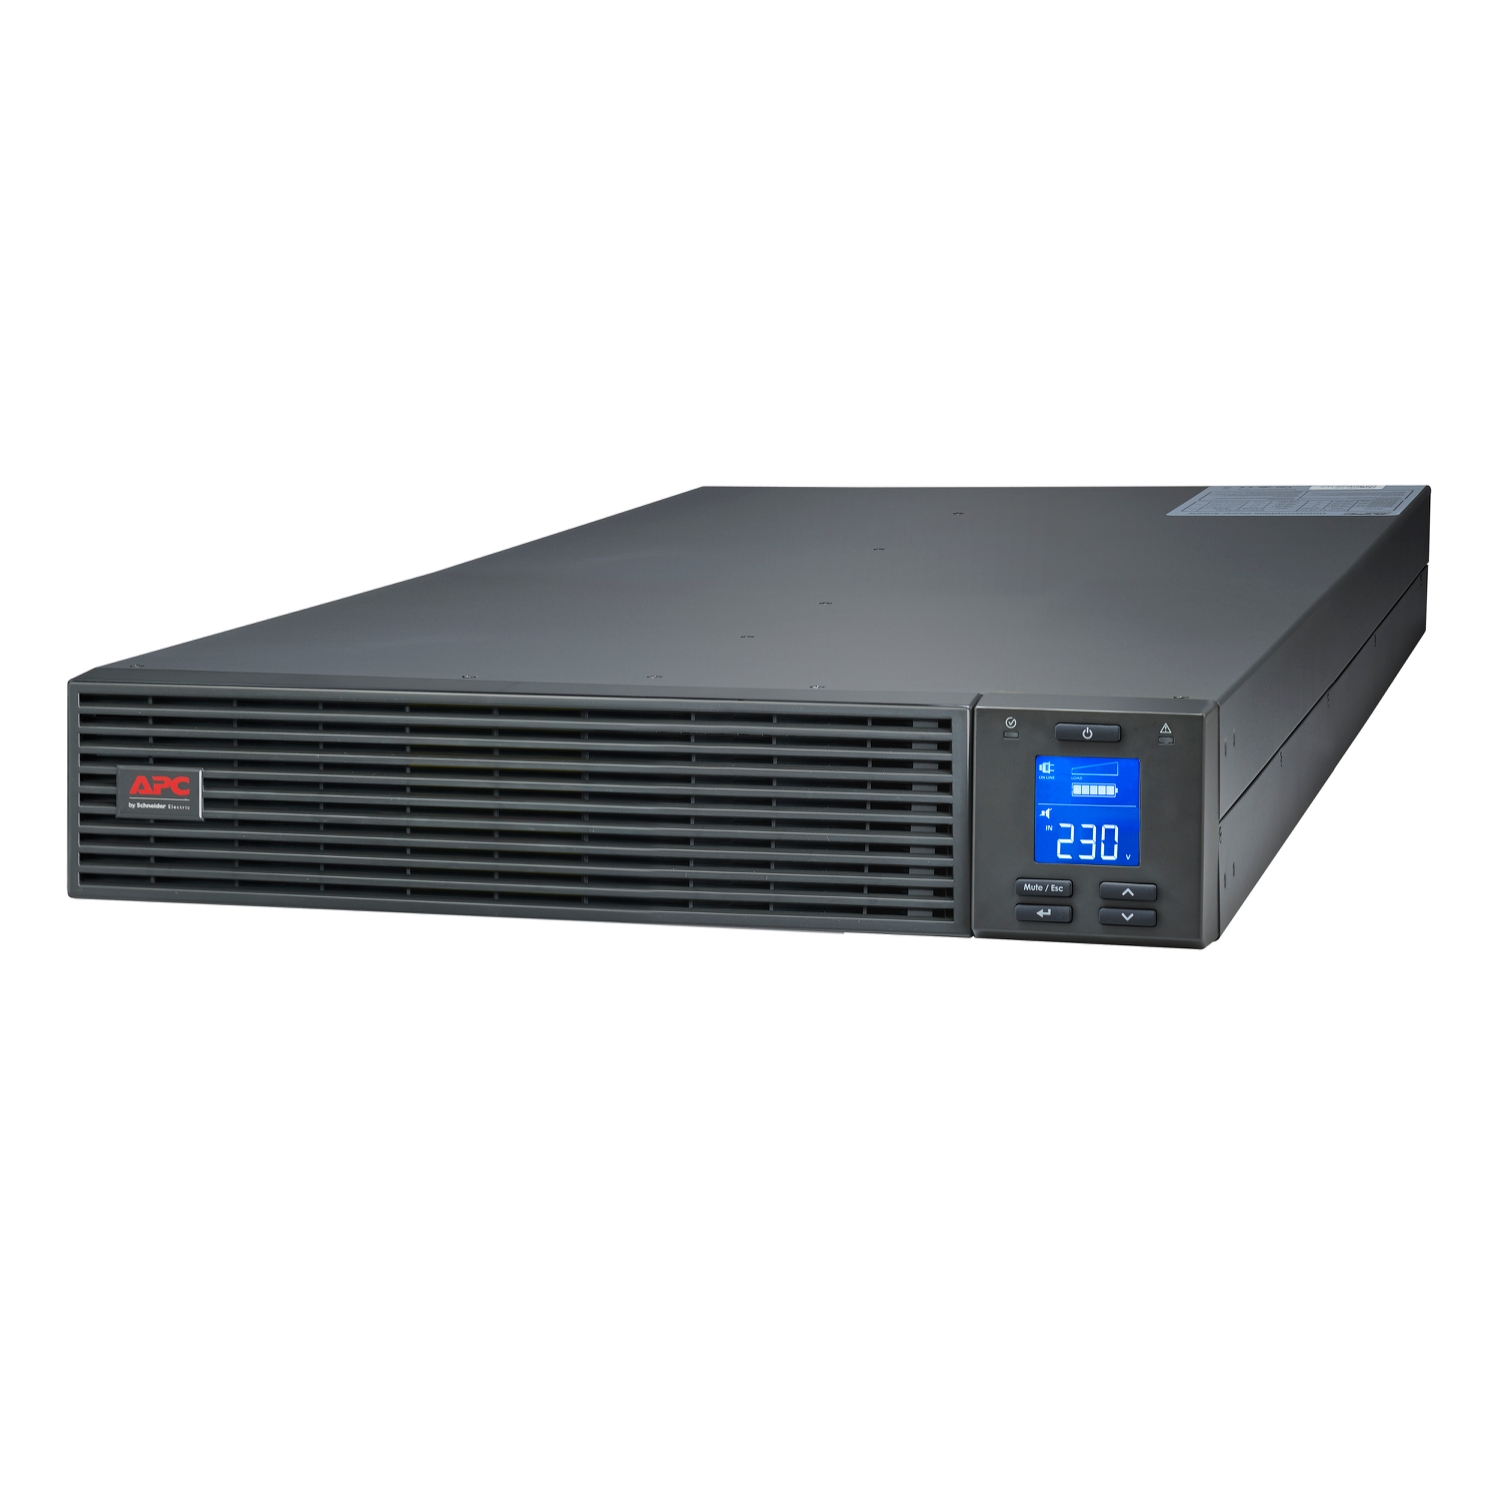 APC SRV6KUXI-IN Easy UPS On-Line, 6kVA/6kW, Rackmount 2U, 230V, 1x Hard wire 3-wire(1P+N+E) outlets, Intelligent Card Slot, No battery, W/O rail kit